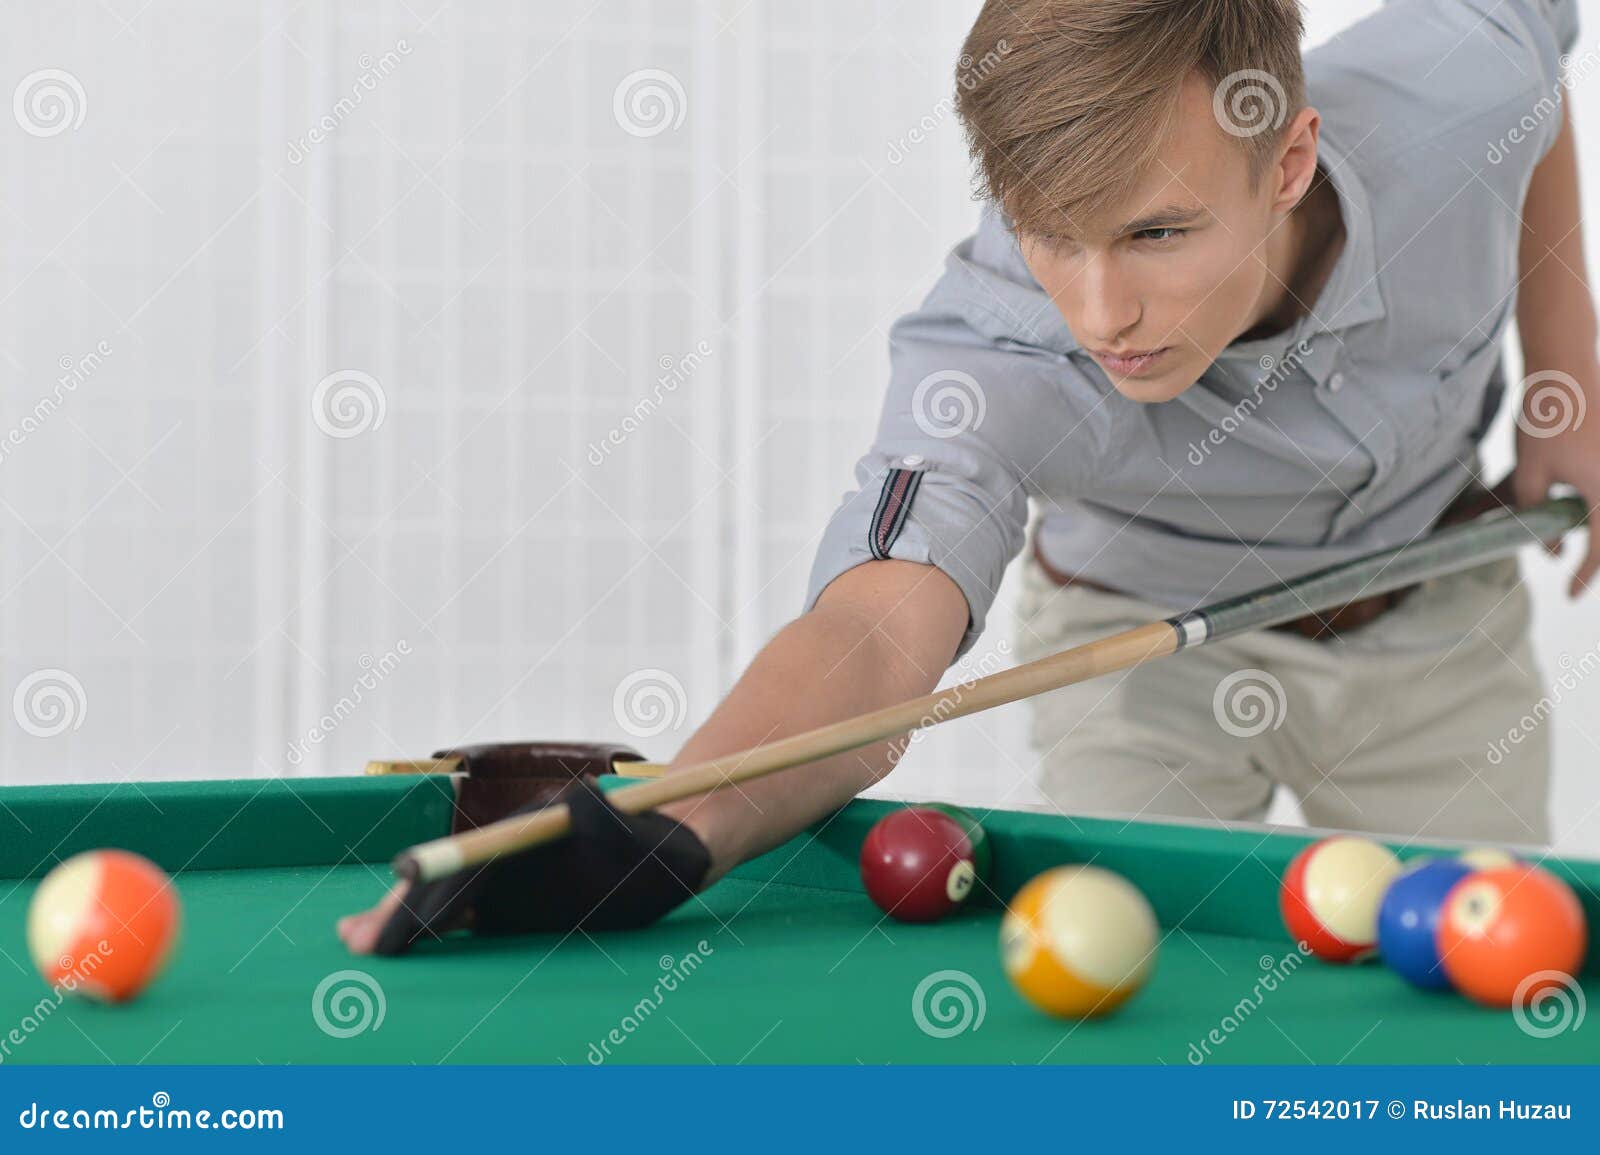 Man Playing Billiards In Billiard Club Stock Image Image Of Concentration Indoors 72542017